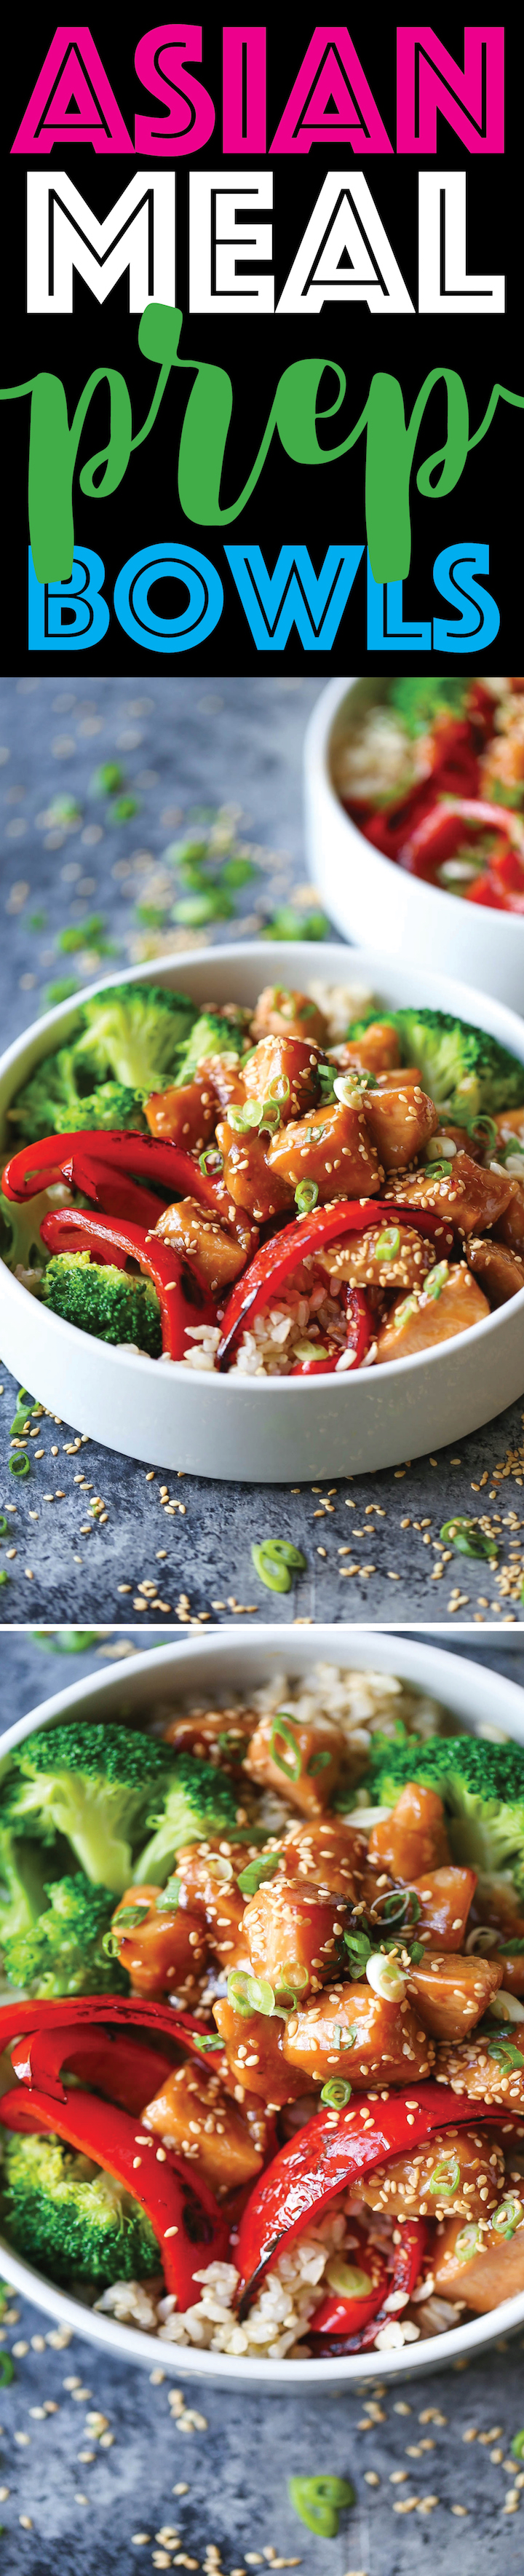 Asian Meal Prep Bowls - Meal prep for the entire week with teriyaki chicken, broccoli, bell pepper and brown rice. The sauce is also completely homemade!